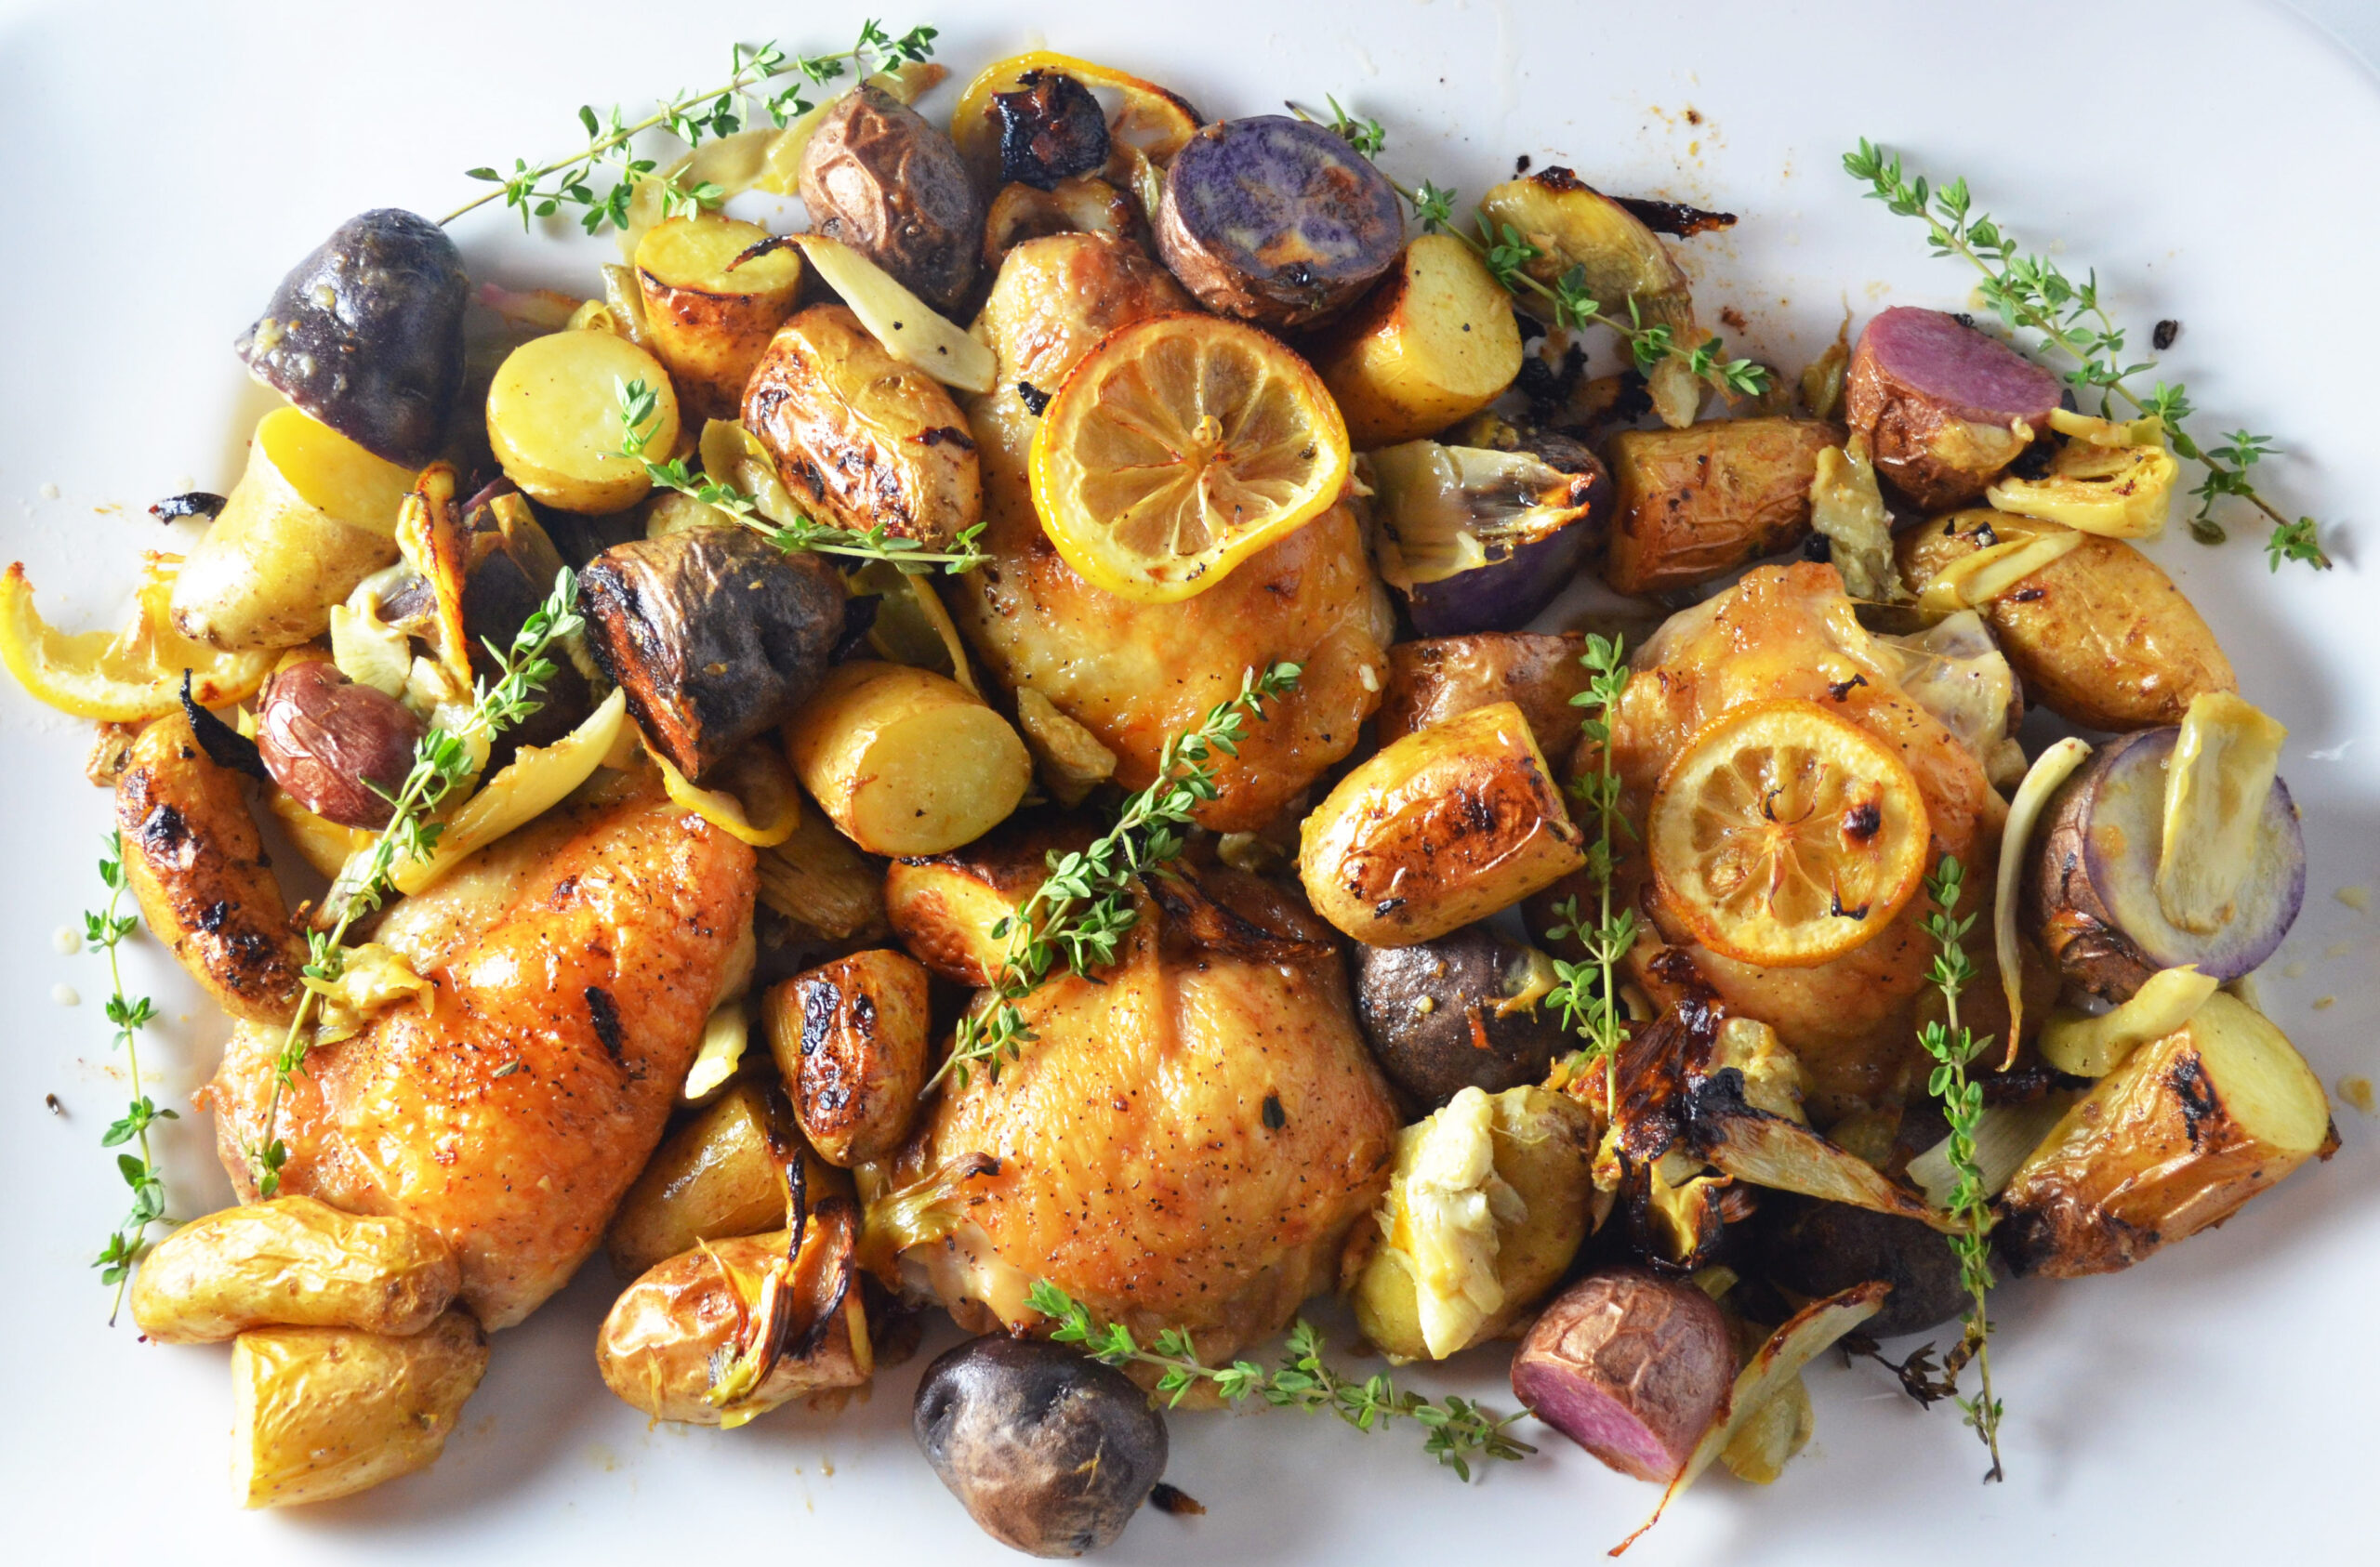 https://www.simplesweetsavory.com/wp-content/uploads/2014/09/Lemon-Roasted-Chicken-with-Fennel-Artichokes-and-Potatoes1-scaled.jpg